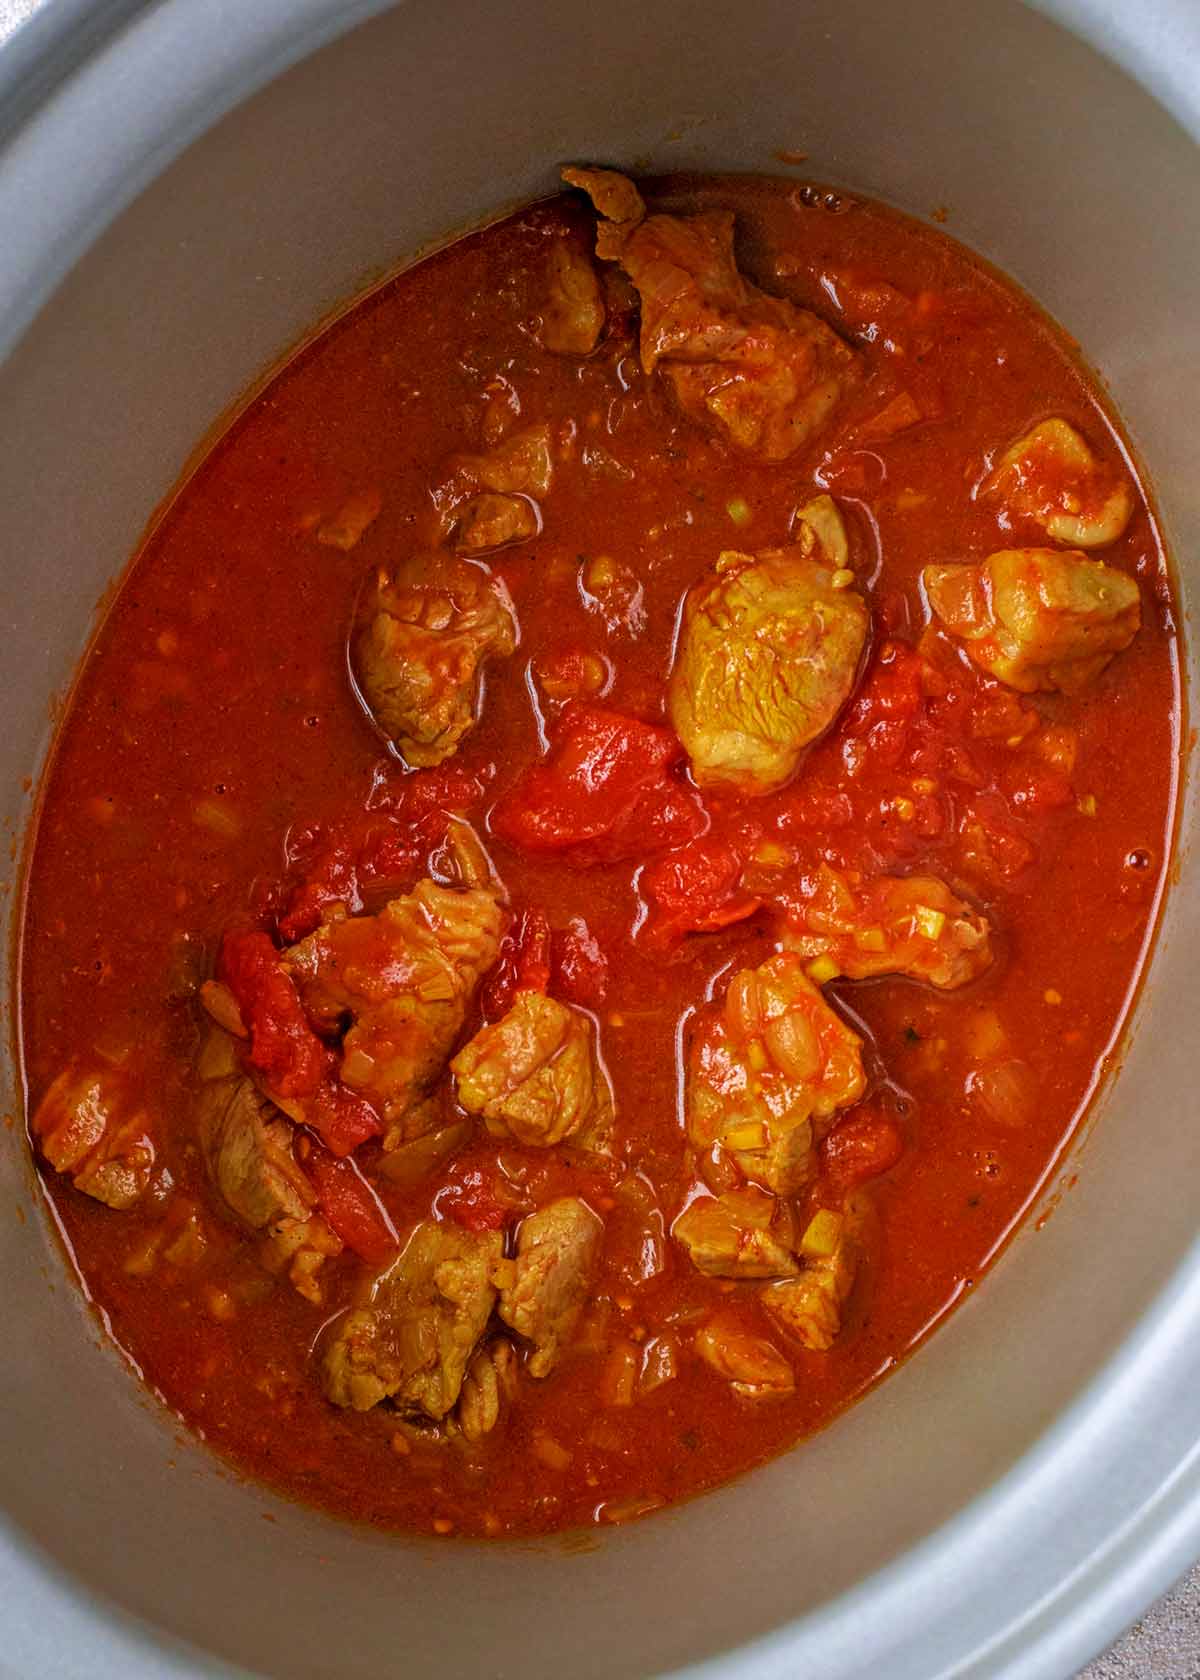 A slow cooker crockpot containing chunks of lamb in a rich tomato sauce.